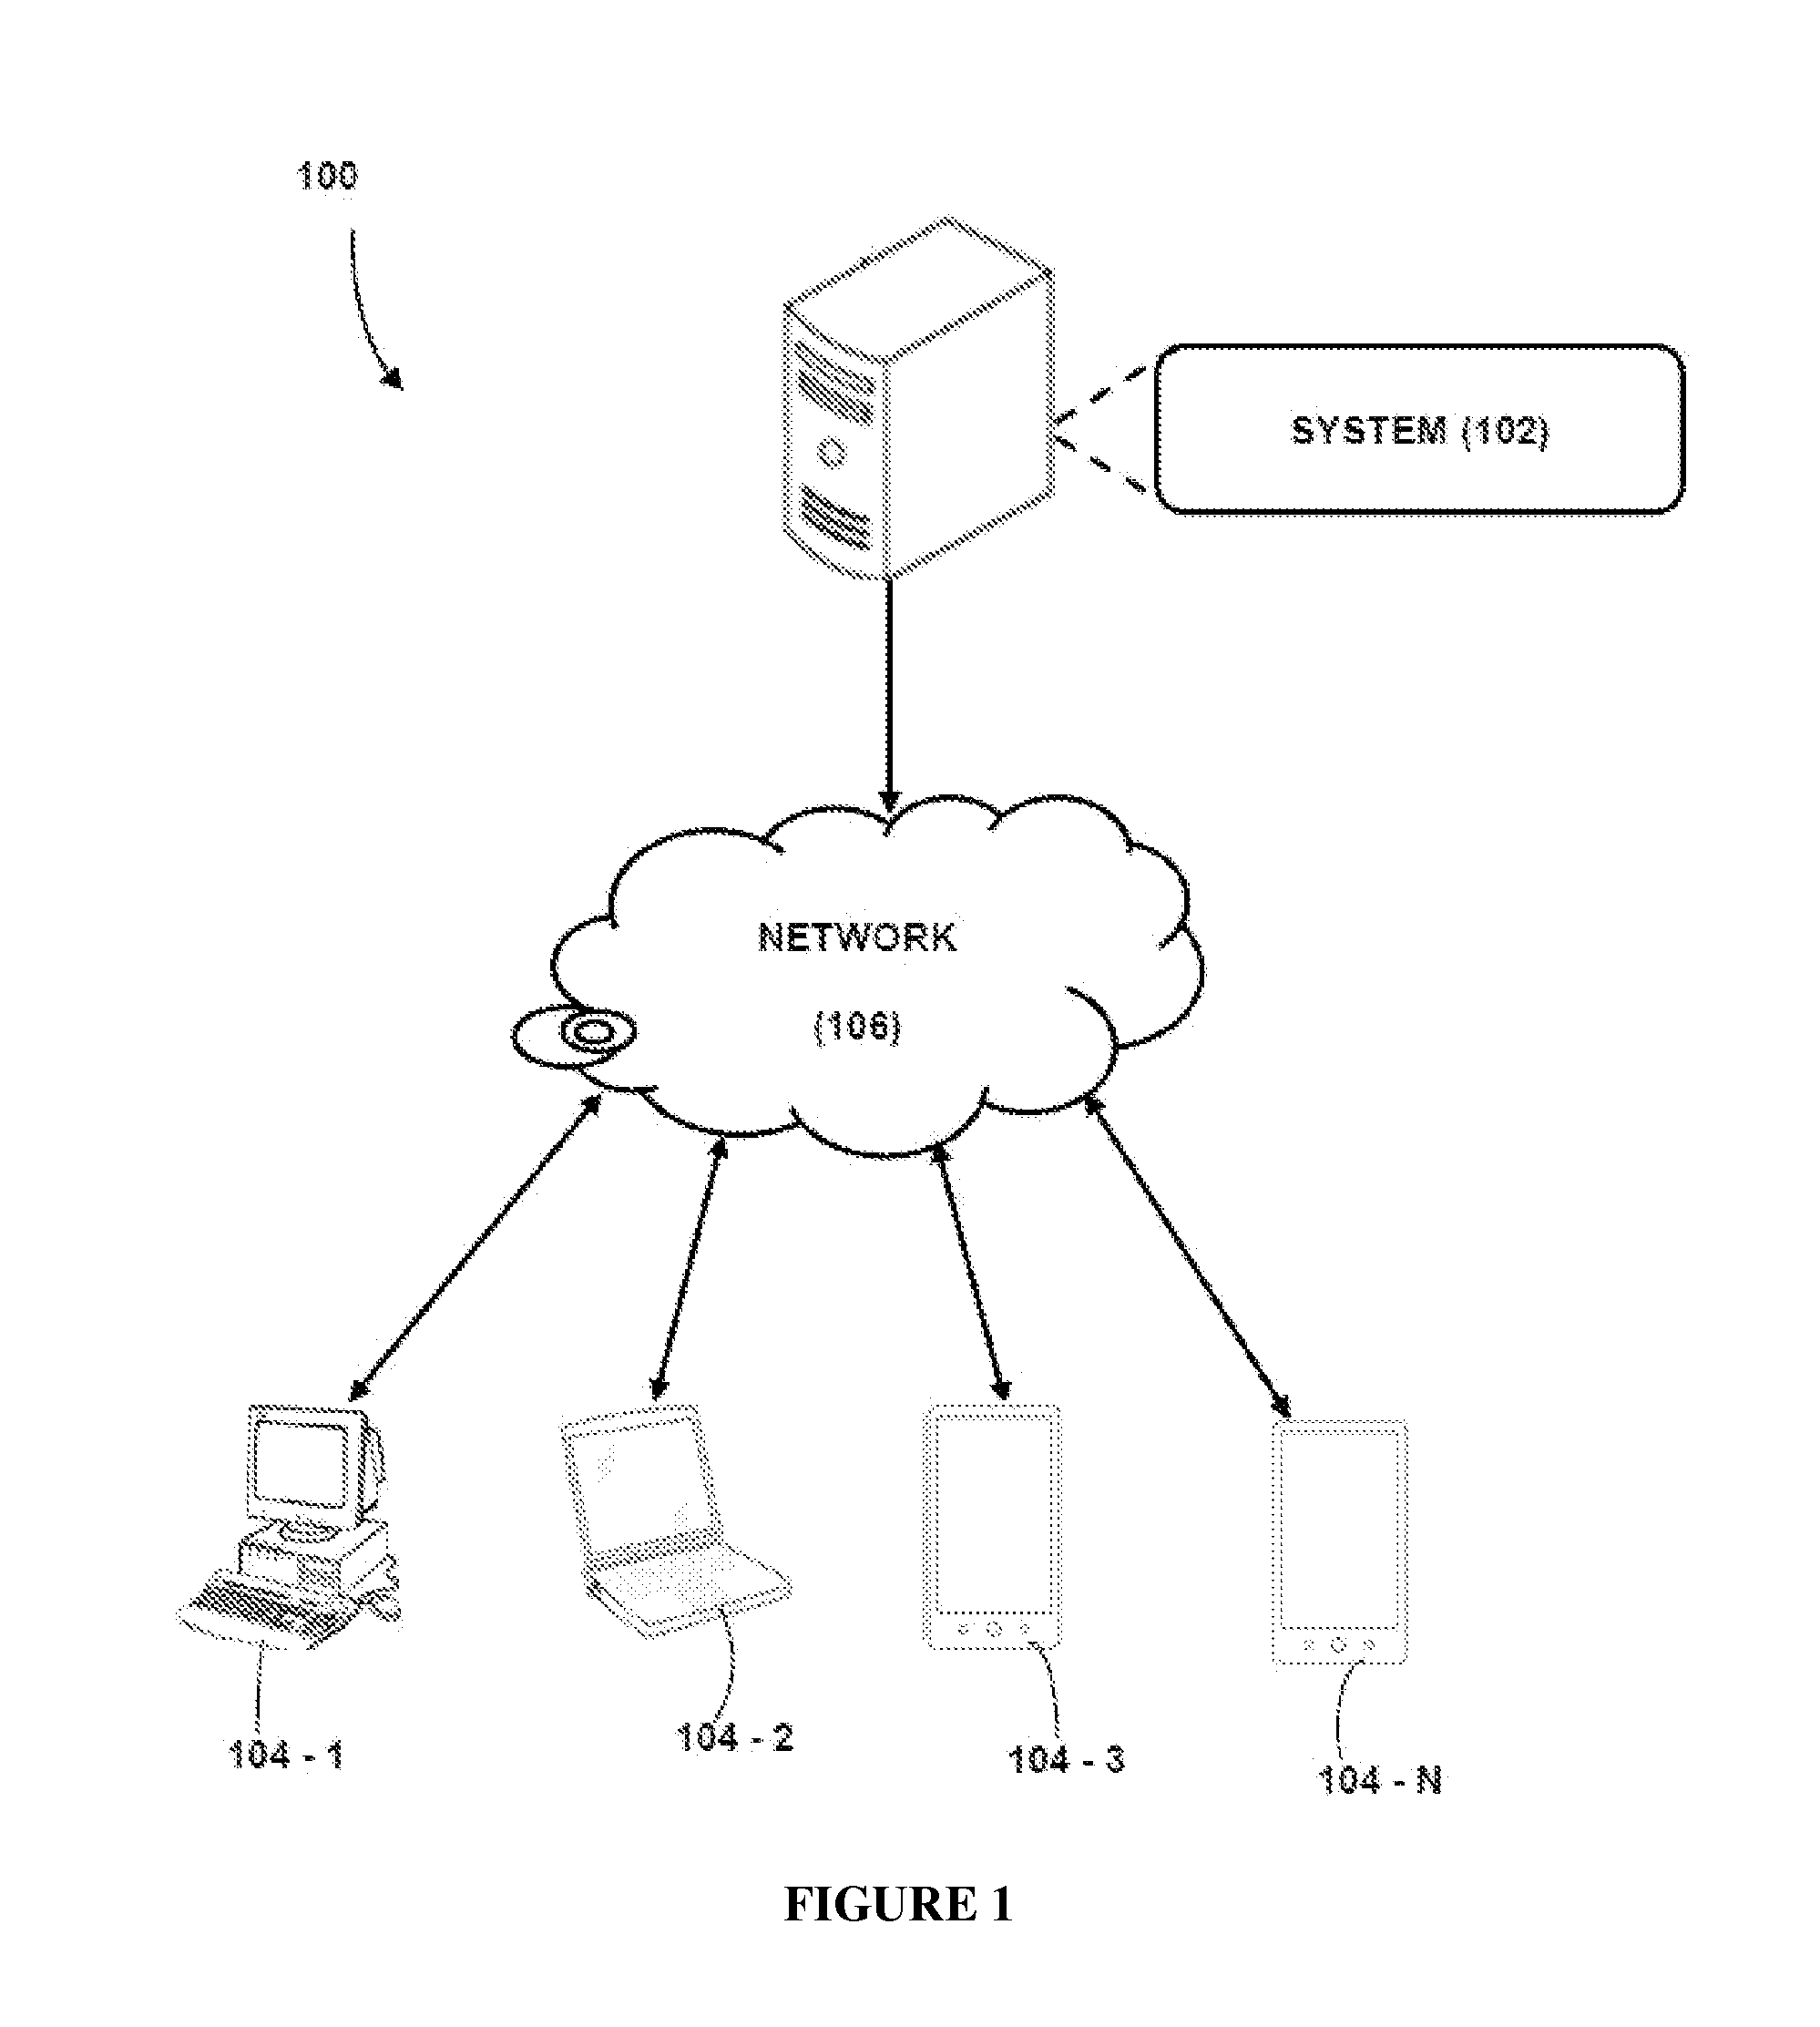 System and Method to Provide Inventory Optimization in a Multi-Echelon Supply Chain Network